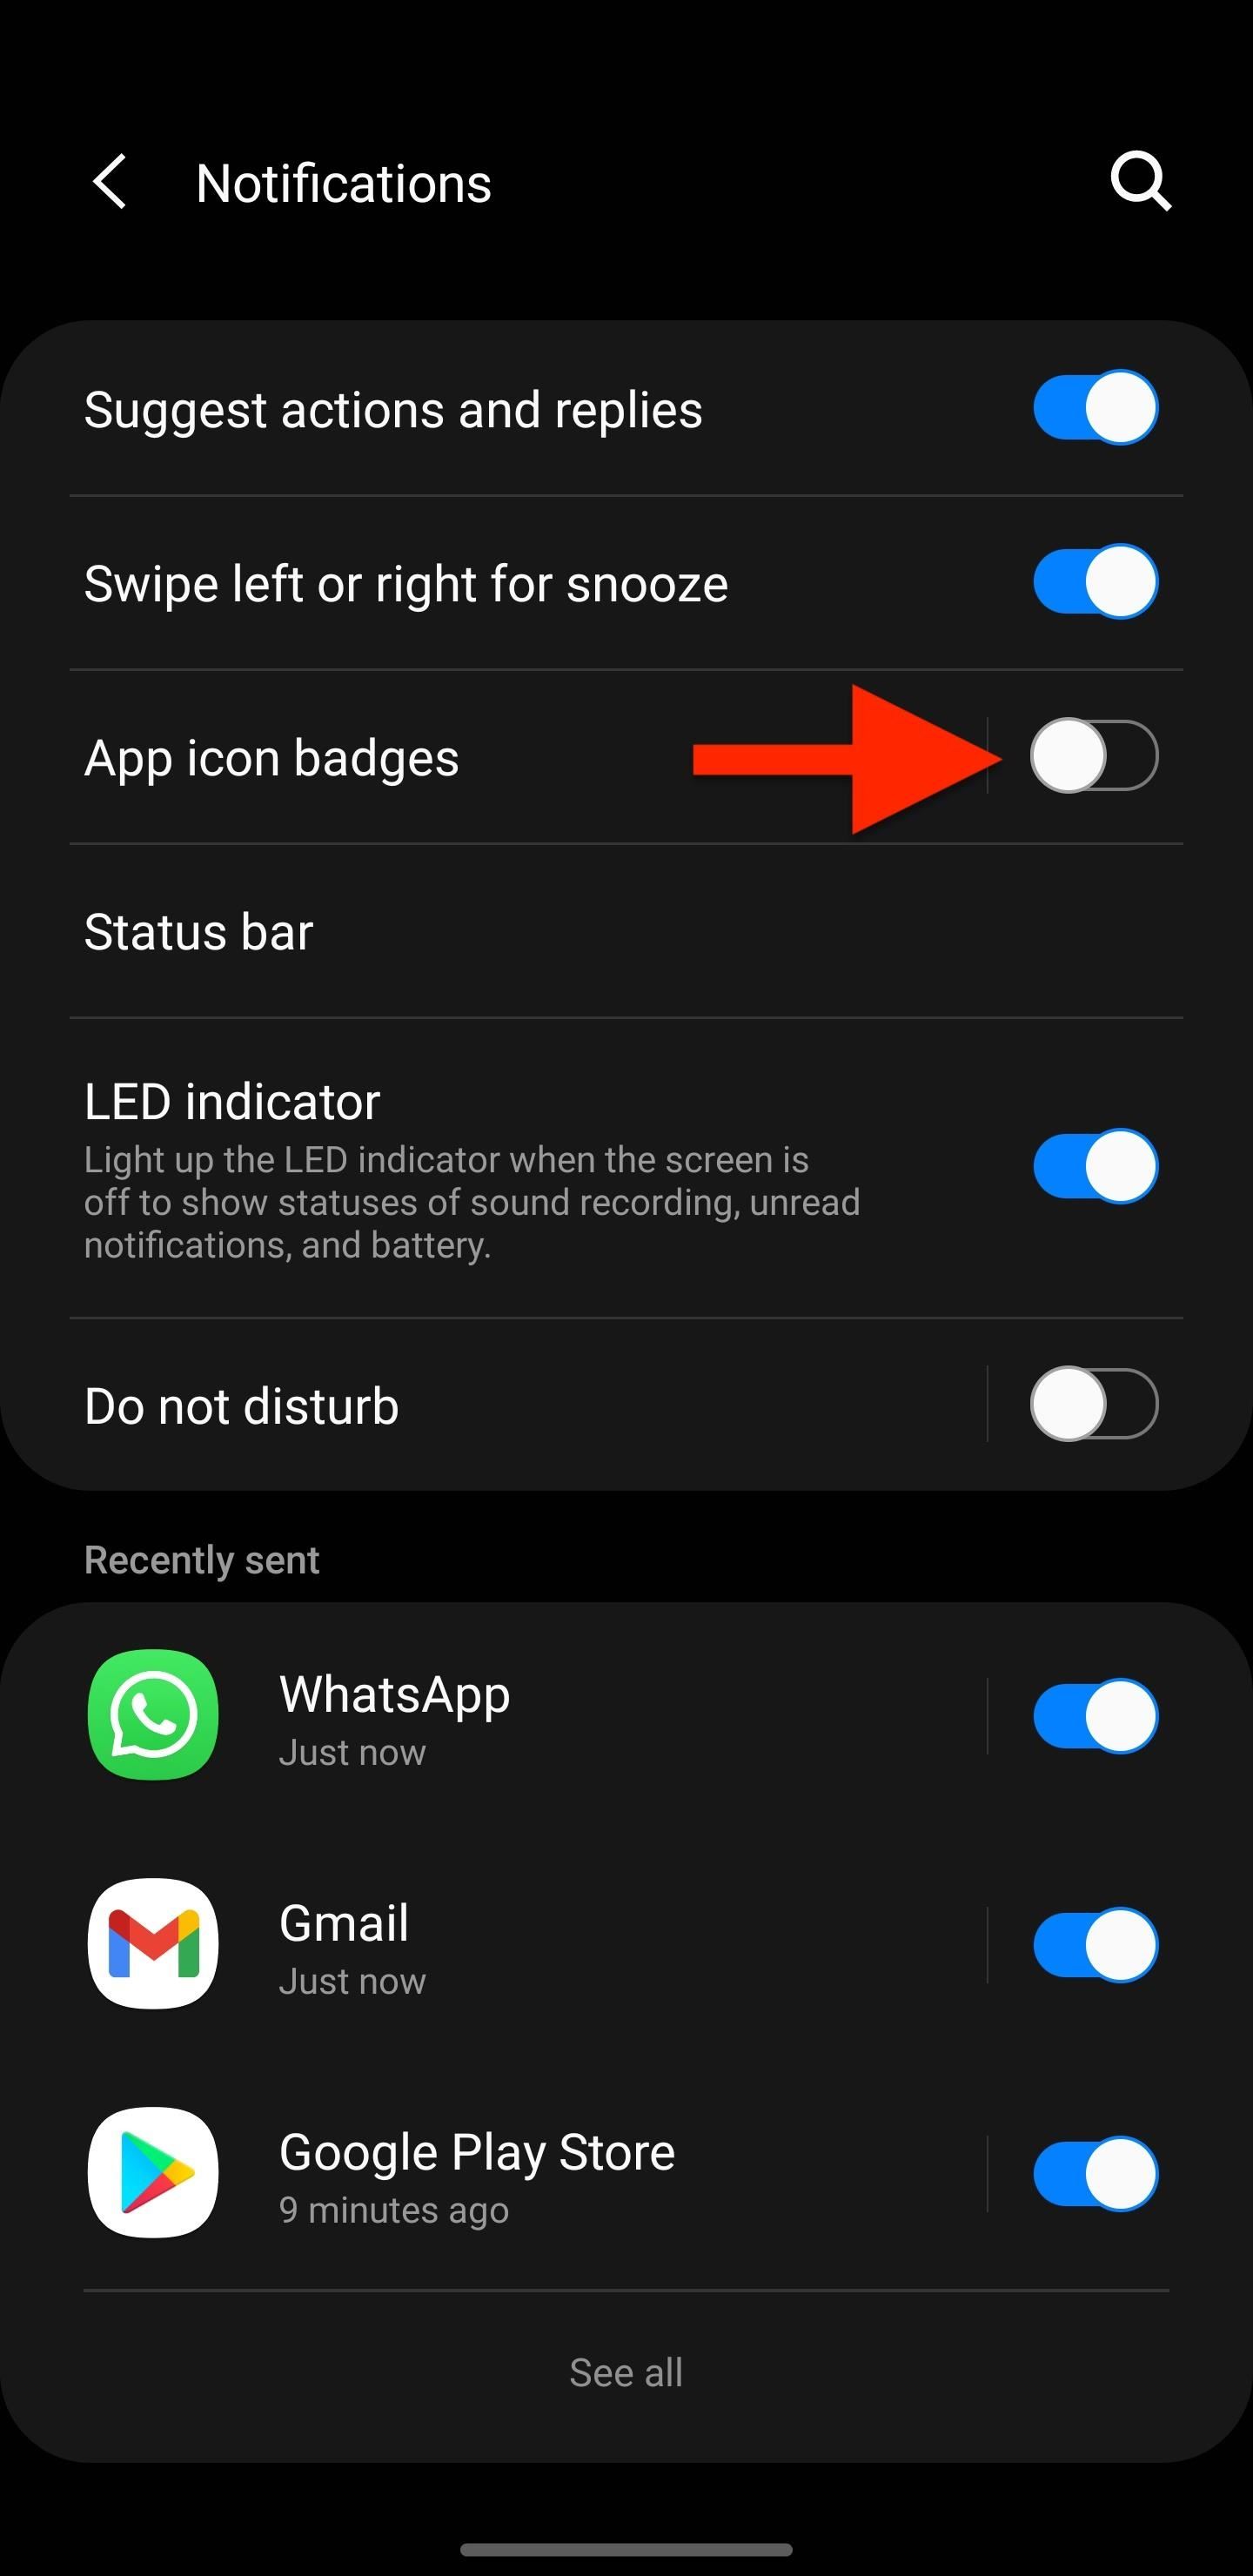 How to Disable App Icon Badges and Unread Notification Counts on Your Samsung Galaxy Smartphone